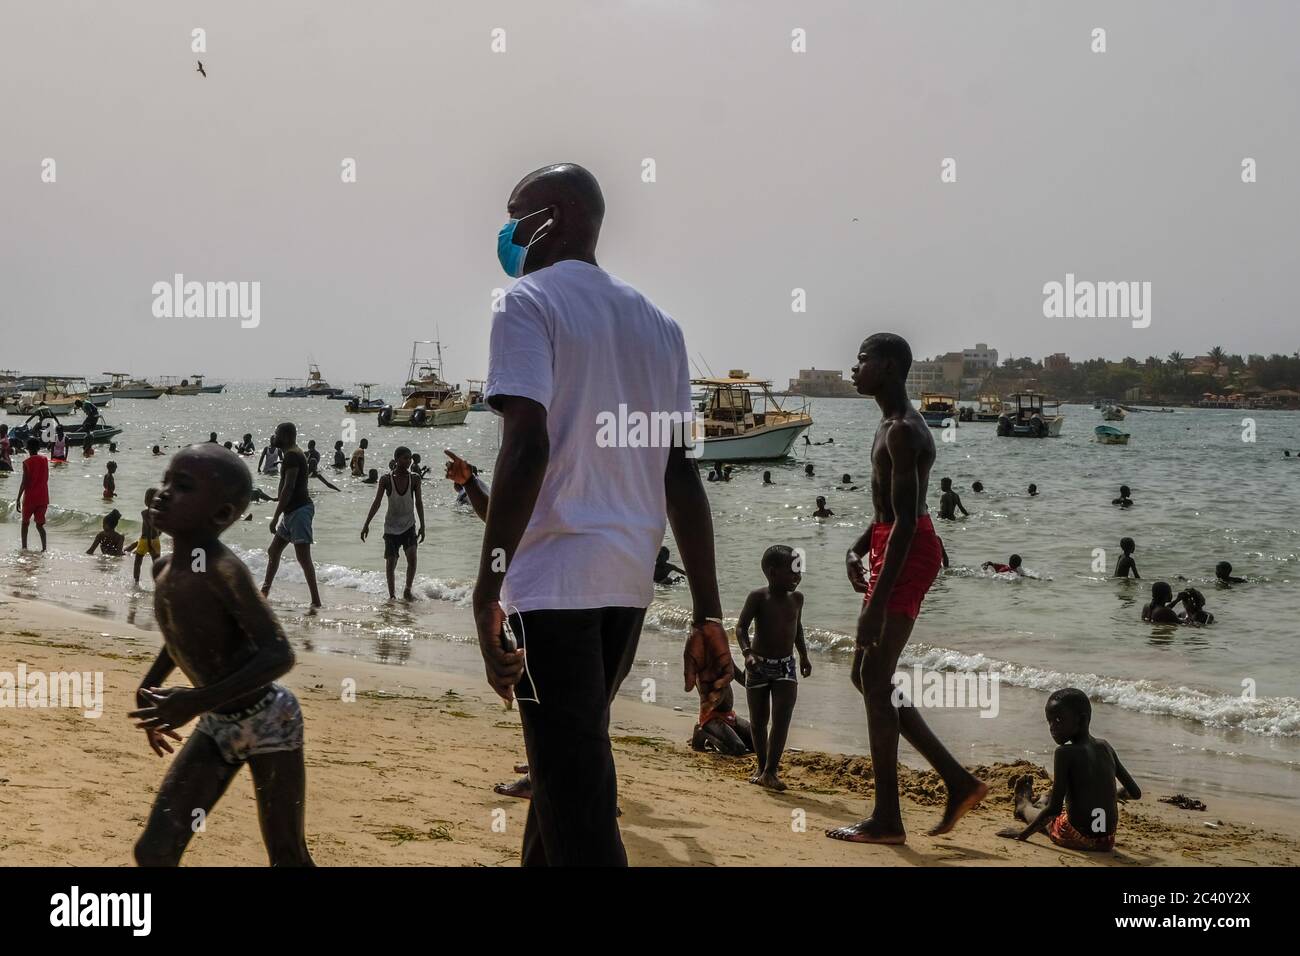 Dakar, Senegal. 21st June, 2020. People enjoy their time on a beach in Dakar, Senegal, 21, 2020. Senegalese Ministry Health and Social Actions registered on Tuesday 64 new confirmed